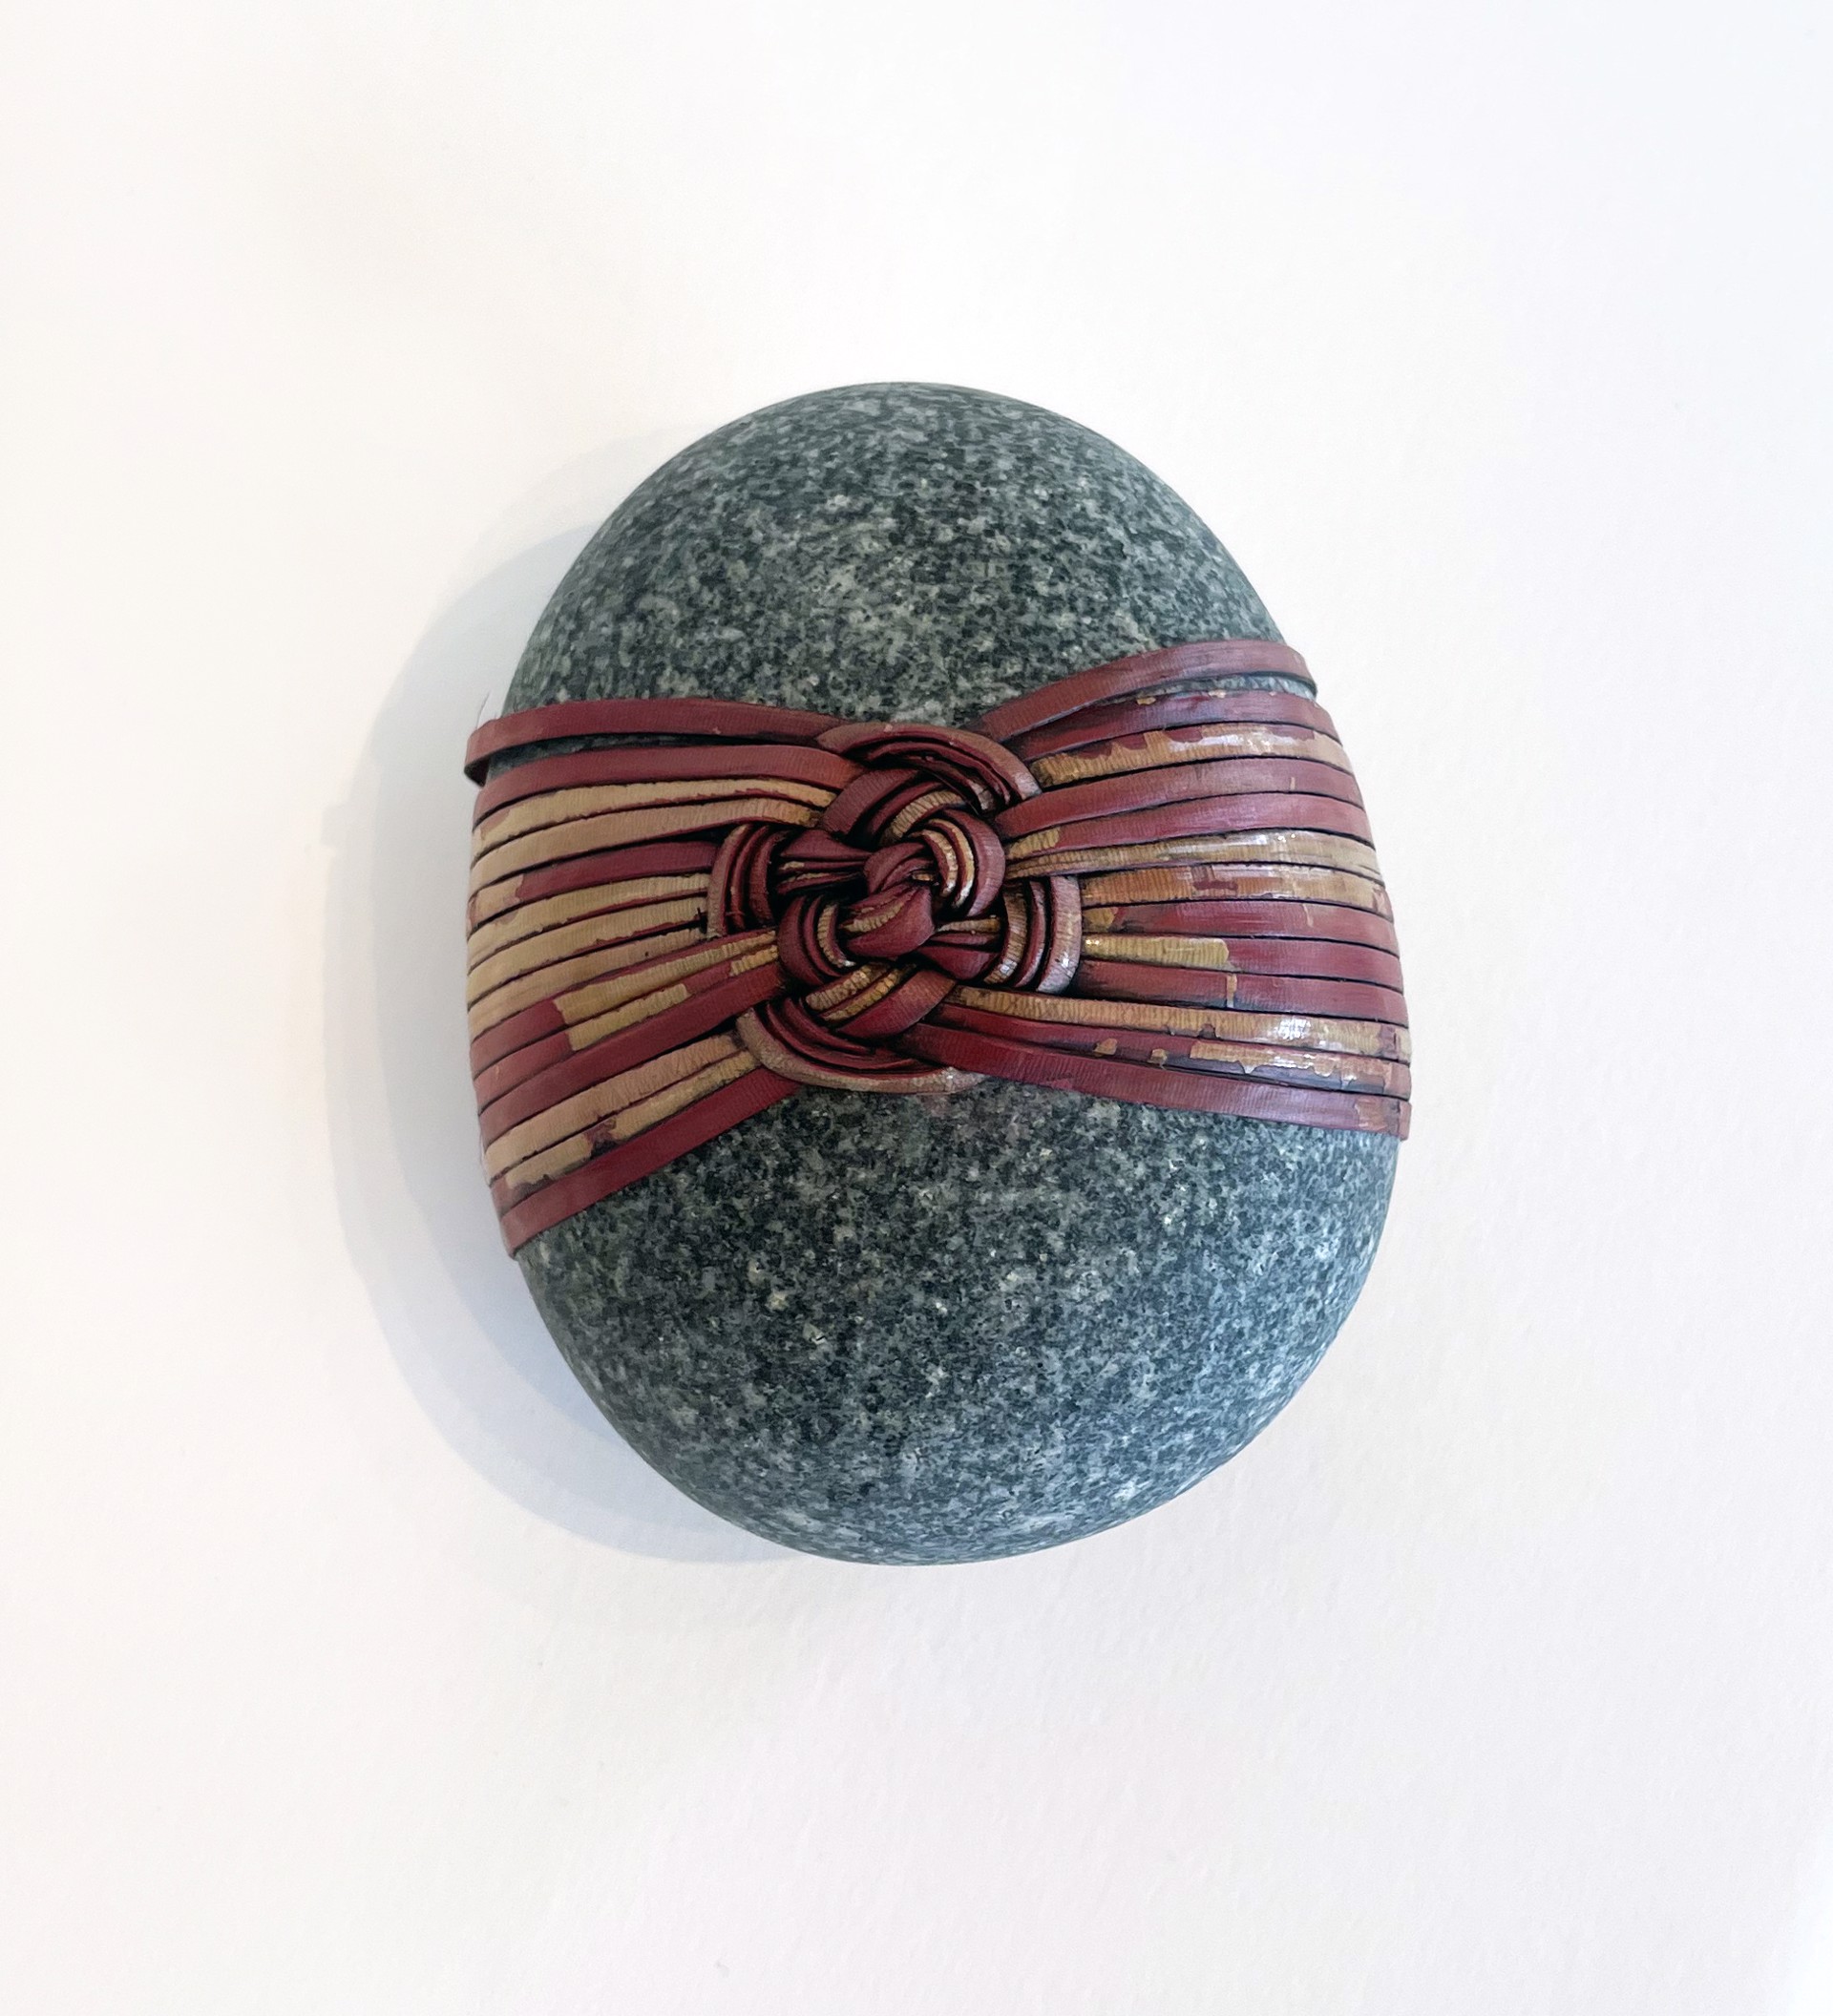 Small Blessing Stone by Deloss Webber